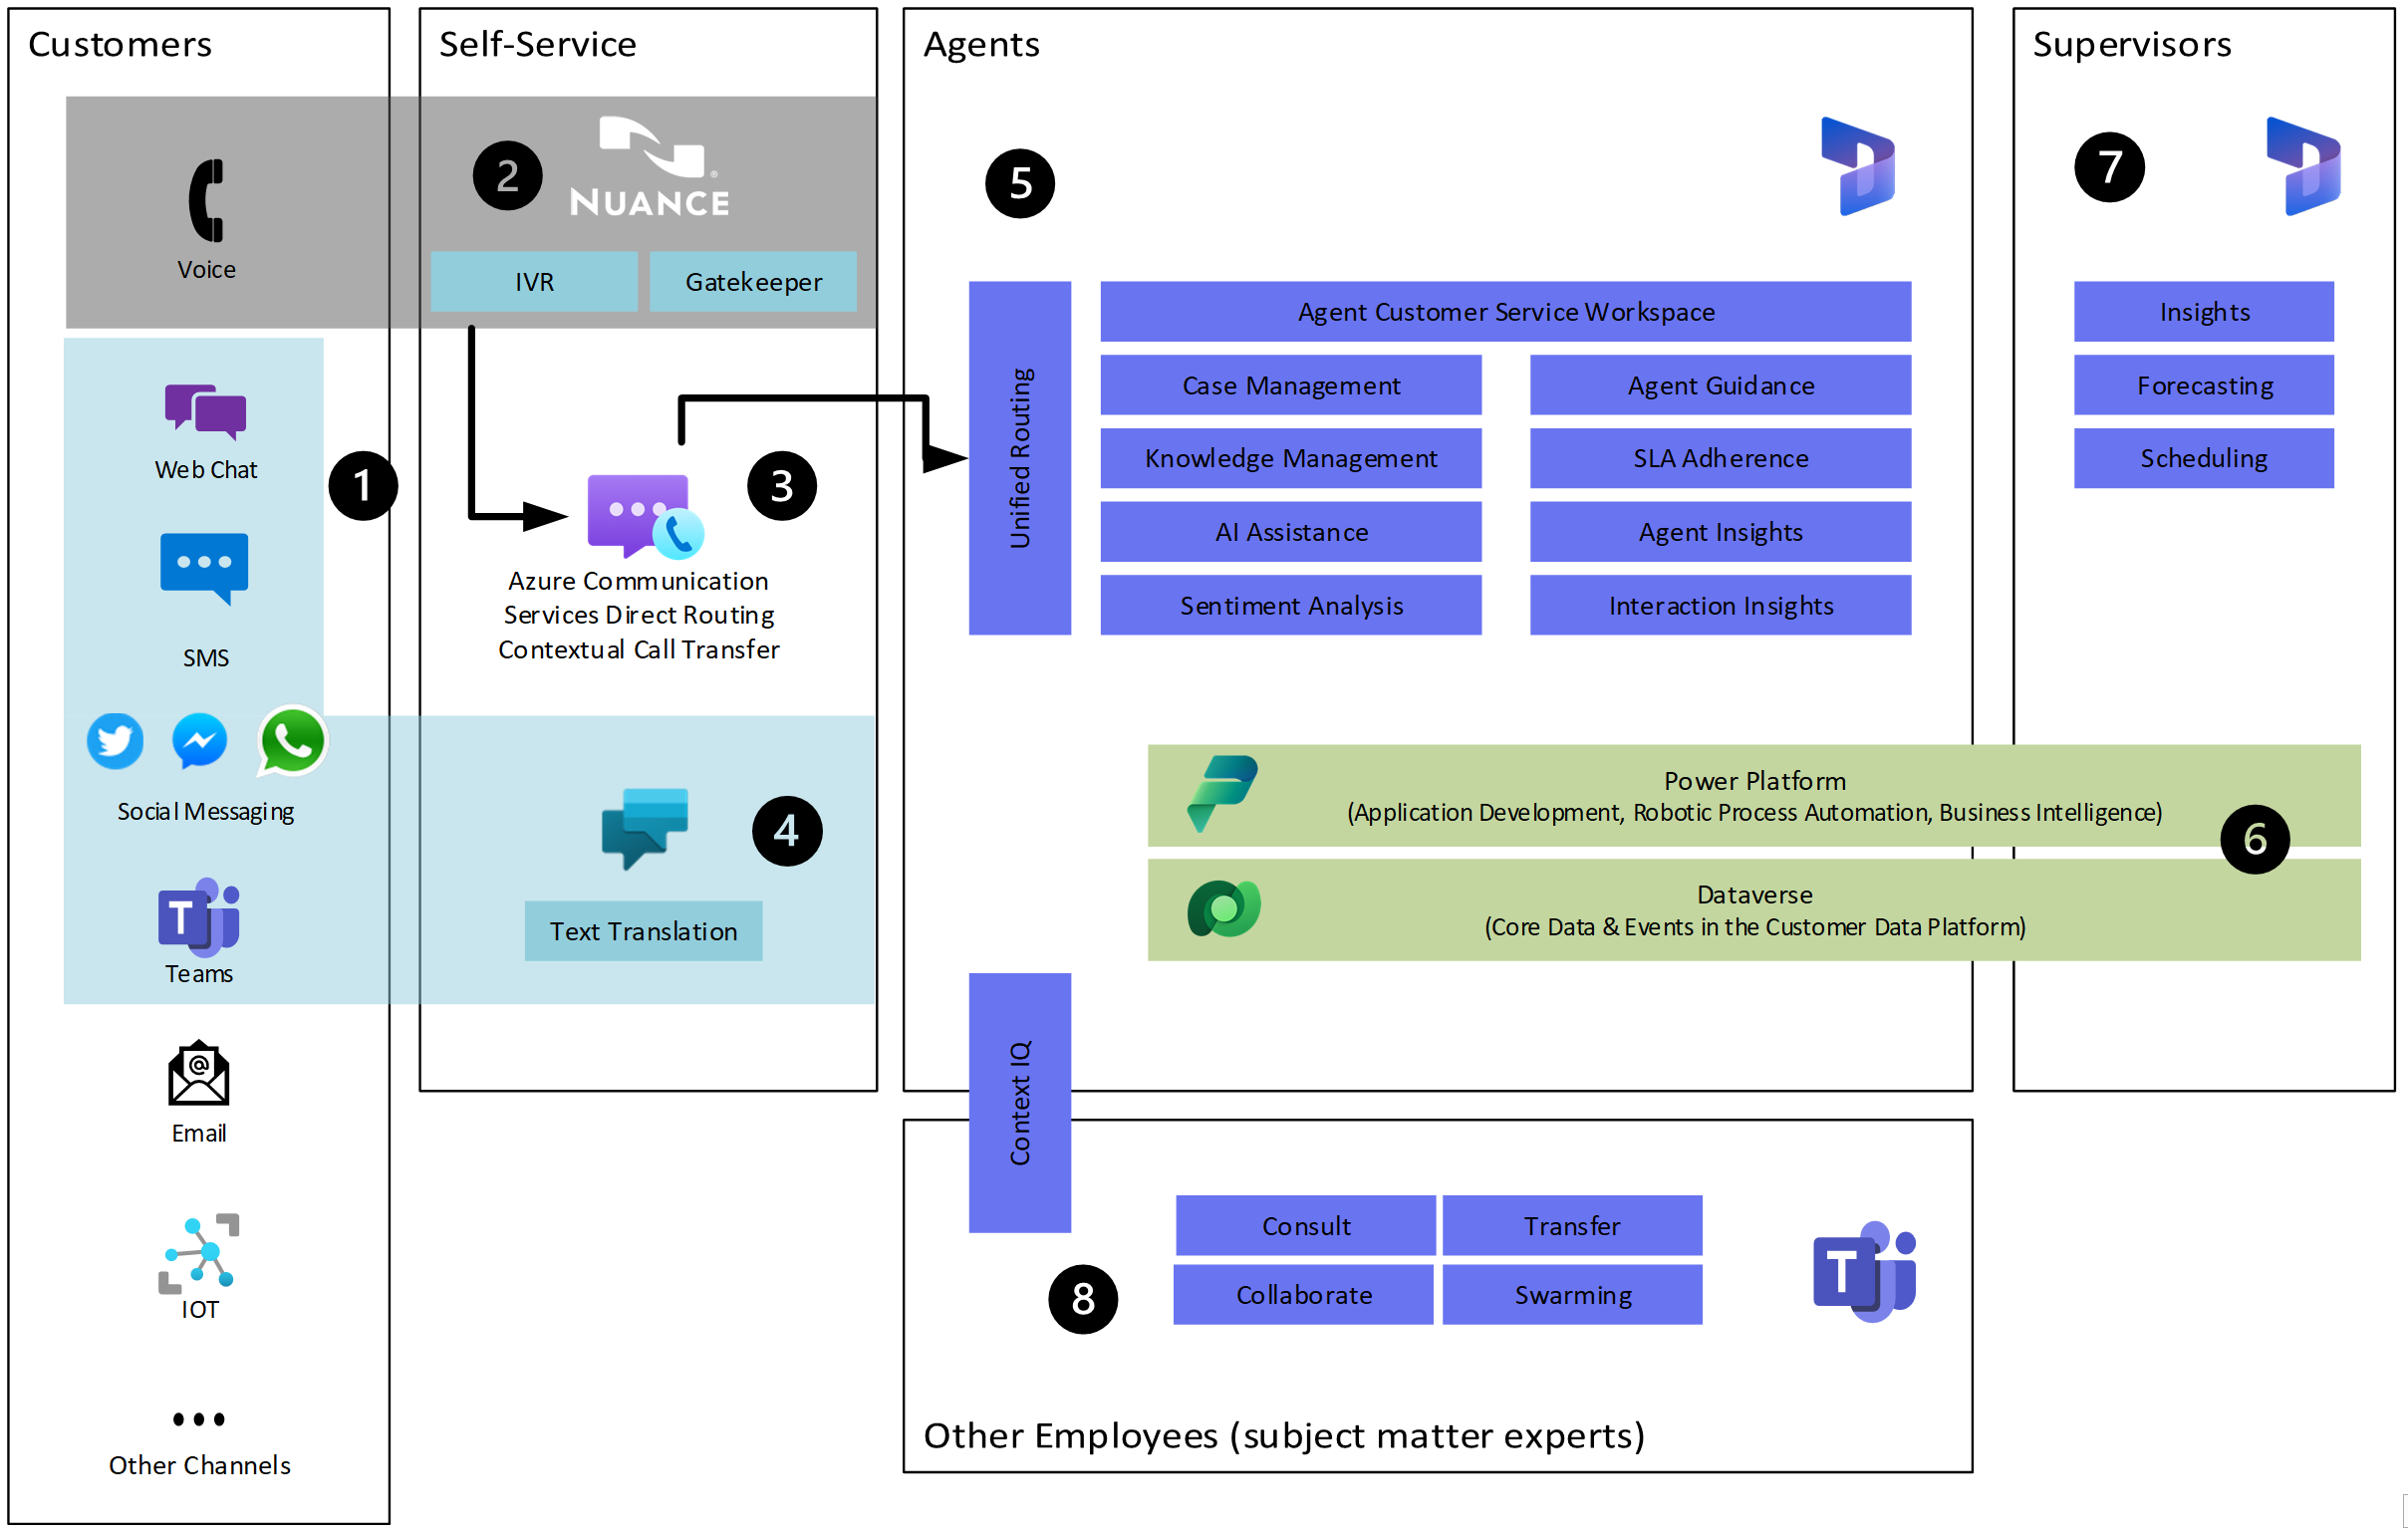 Architecture with Nuance for self-service and Dynamics 365 for supervision.